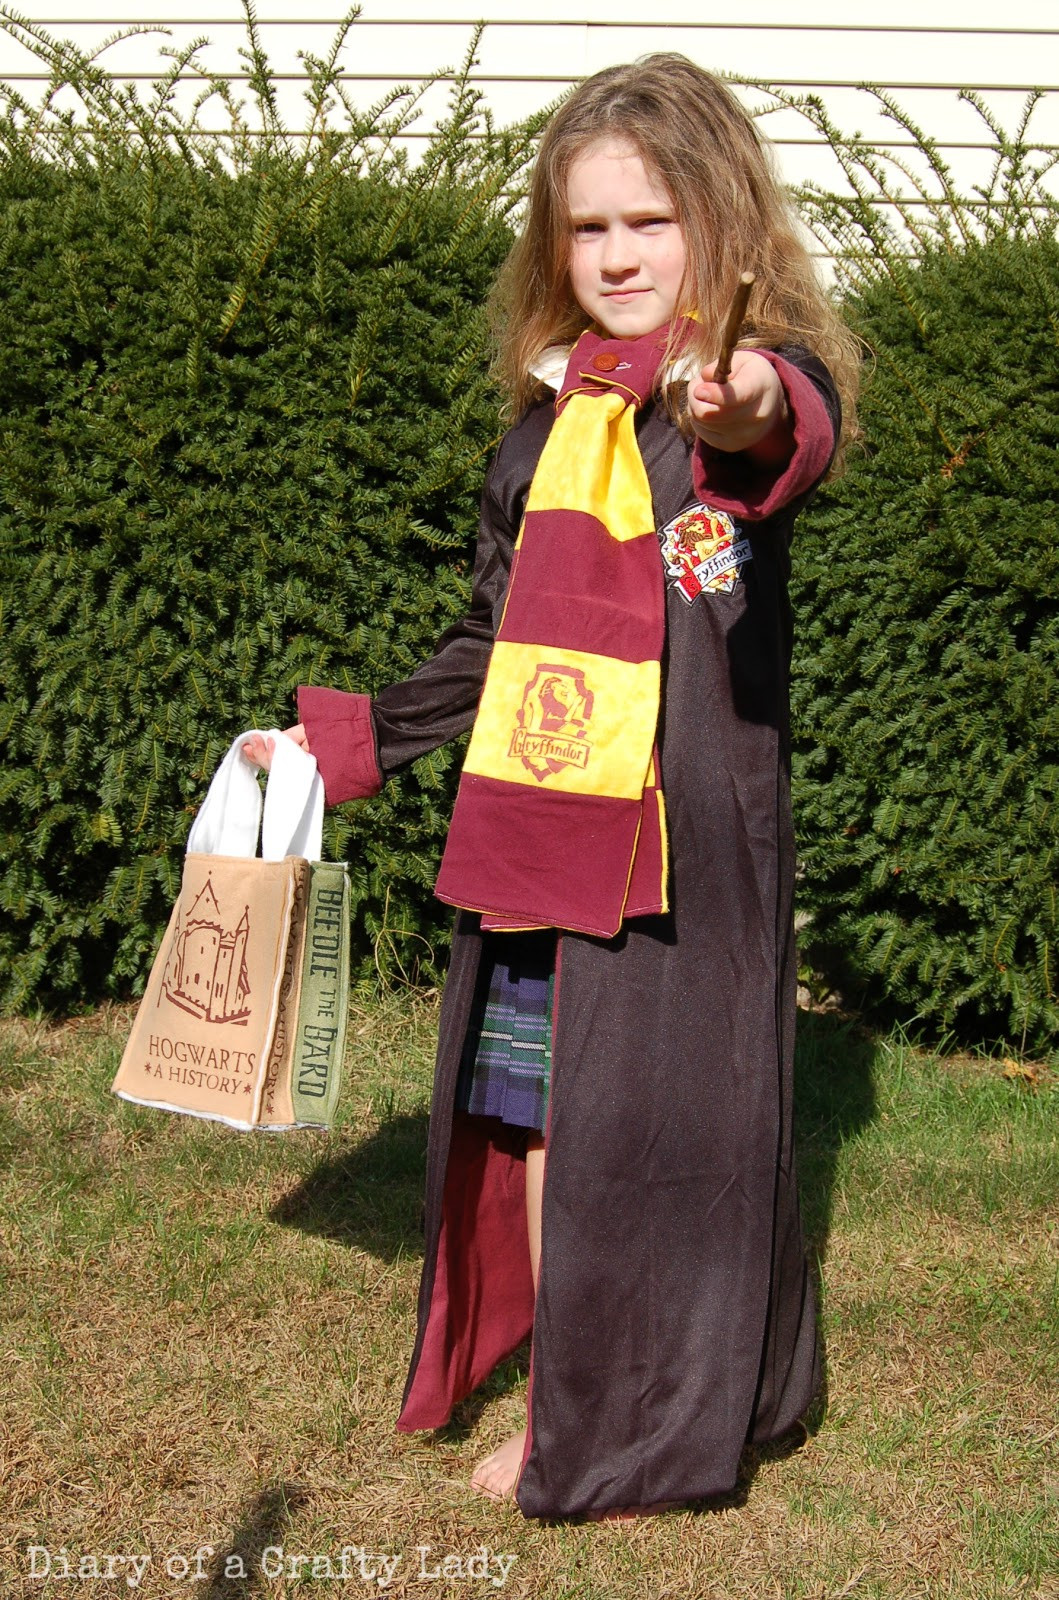 DIY Harry Potter Costumes
 Diary of a Crafty Lady Harry Potter Halloween Costumes